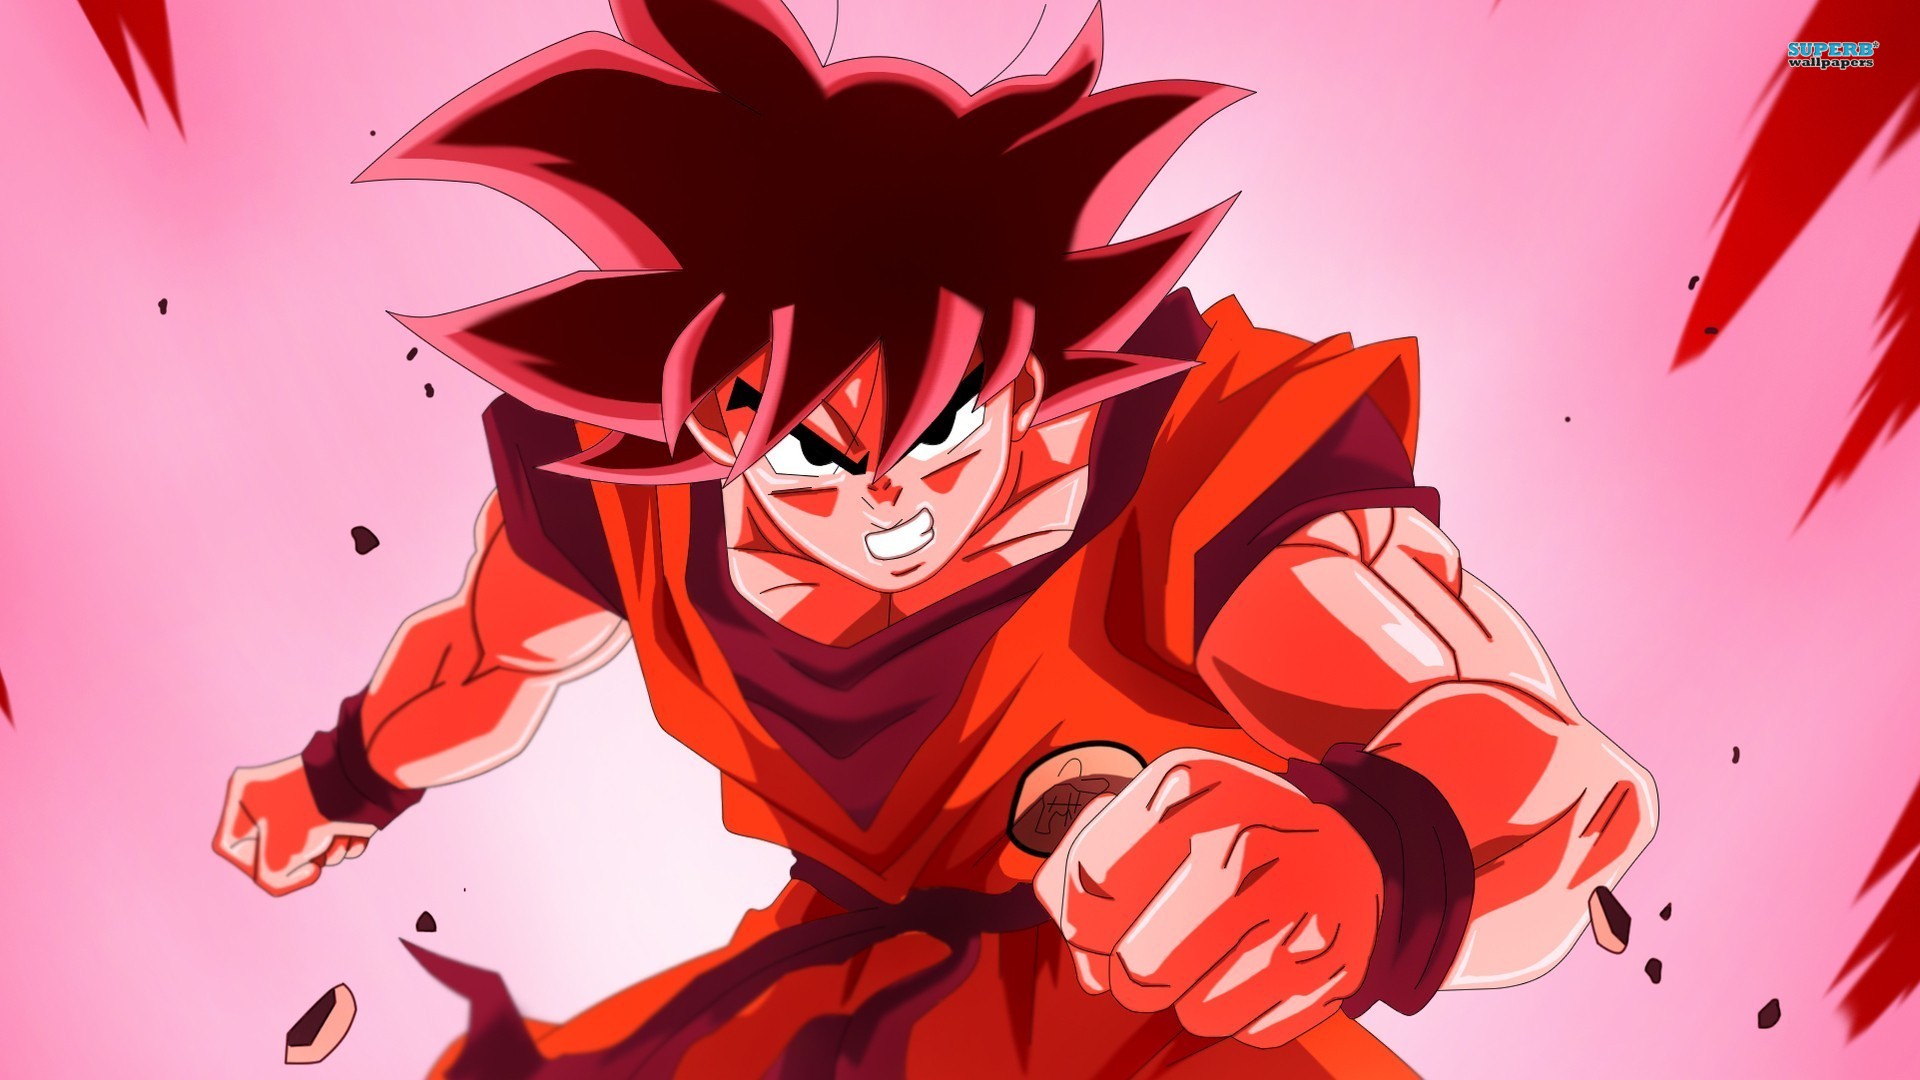 444 Dragon Ball Z HD Wallpapers Backgrounds - Wallpaper Abyss